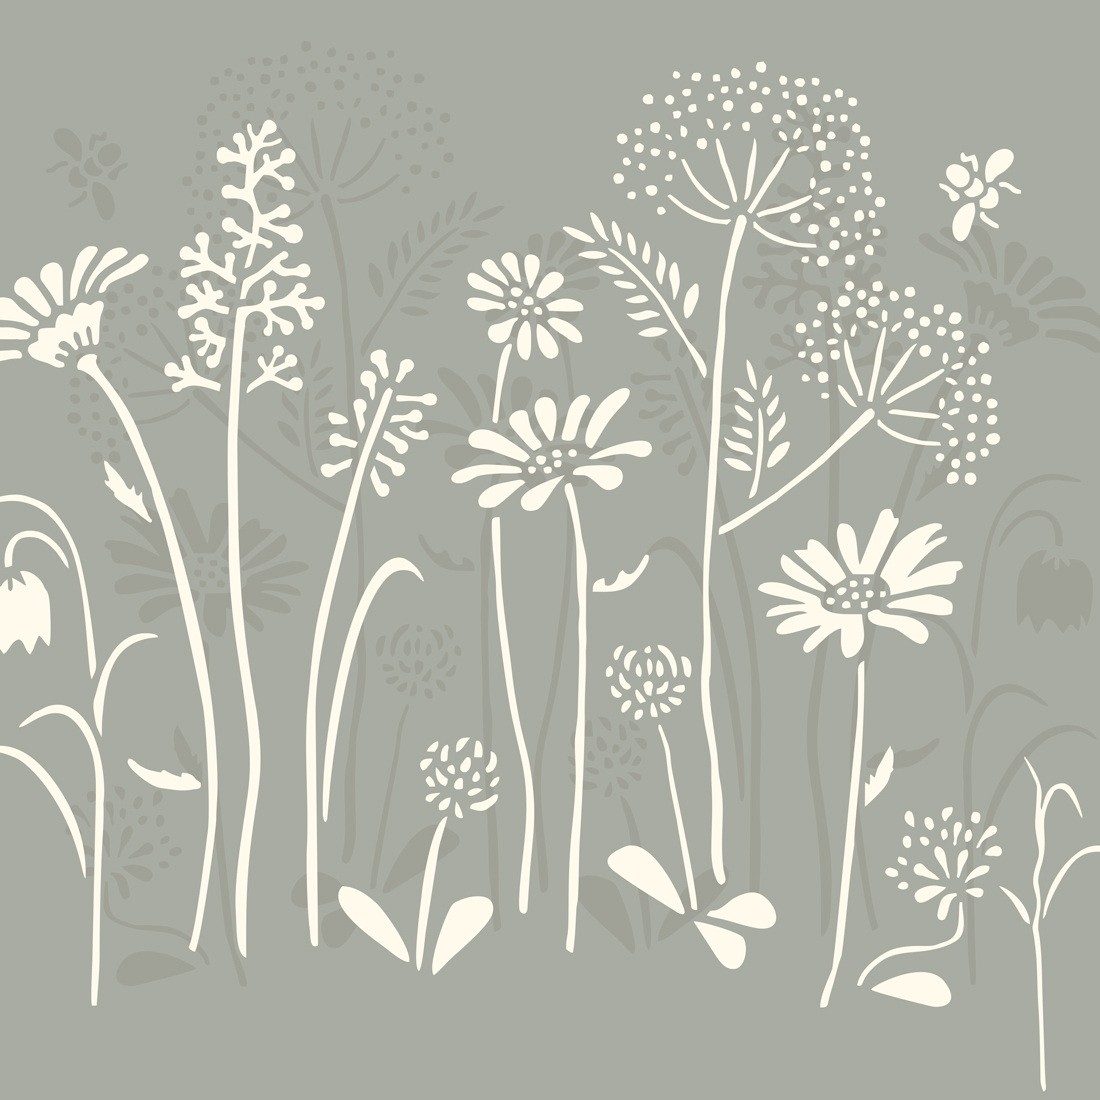 Meadow-Flowers-Old-White-and-Paris-Grey-schablon-Annie-Sloan-Chalkpain-angsblommor-mala-mobler-tapet-vagg